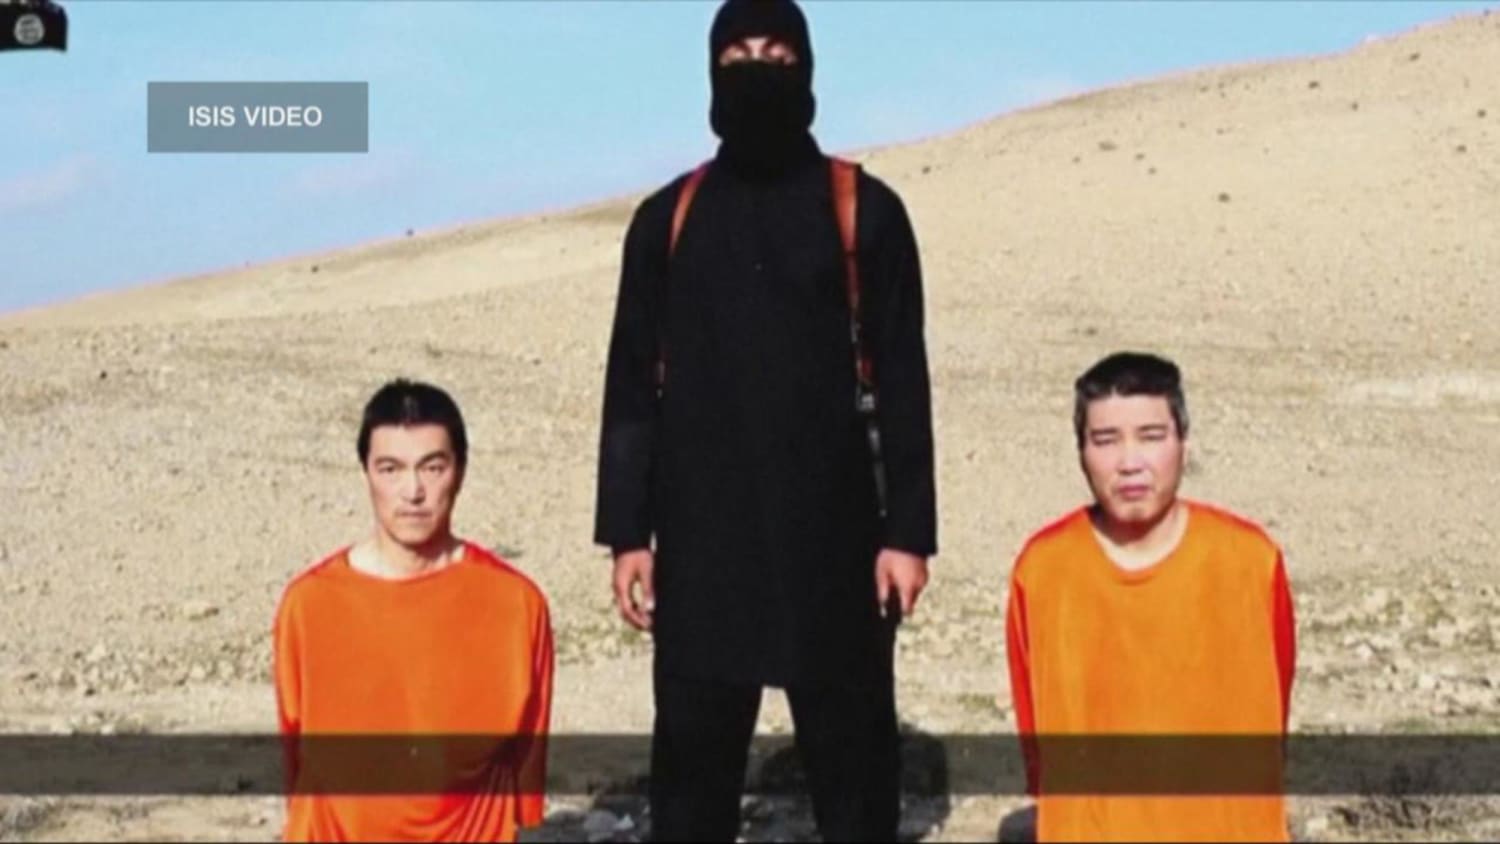 New ISIS Video Purportedly Shows Two Japanese Hostages - NBC News.